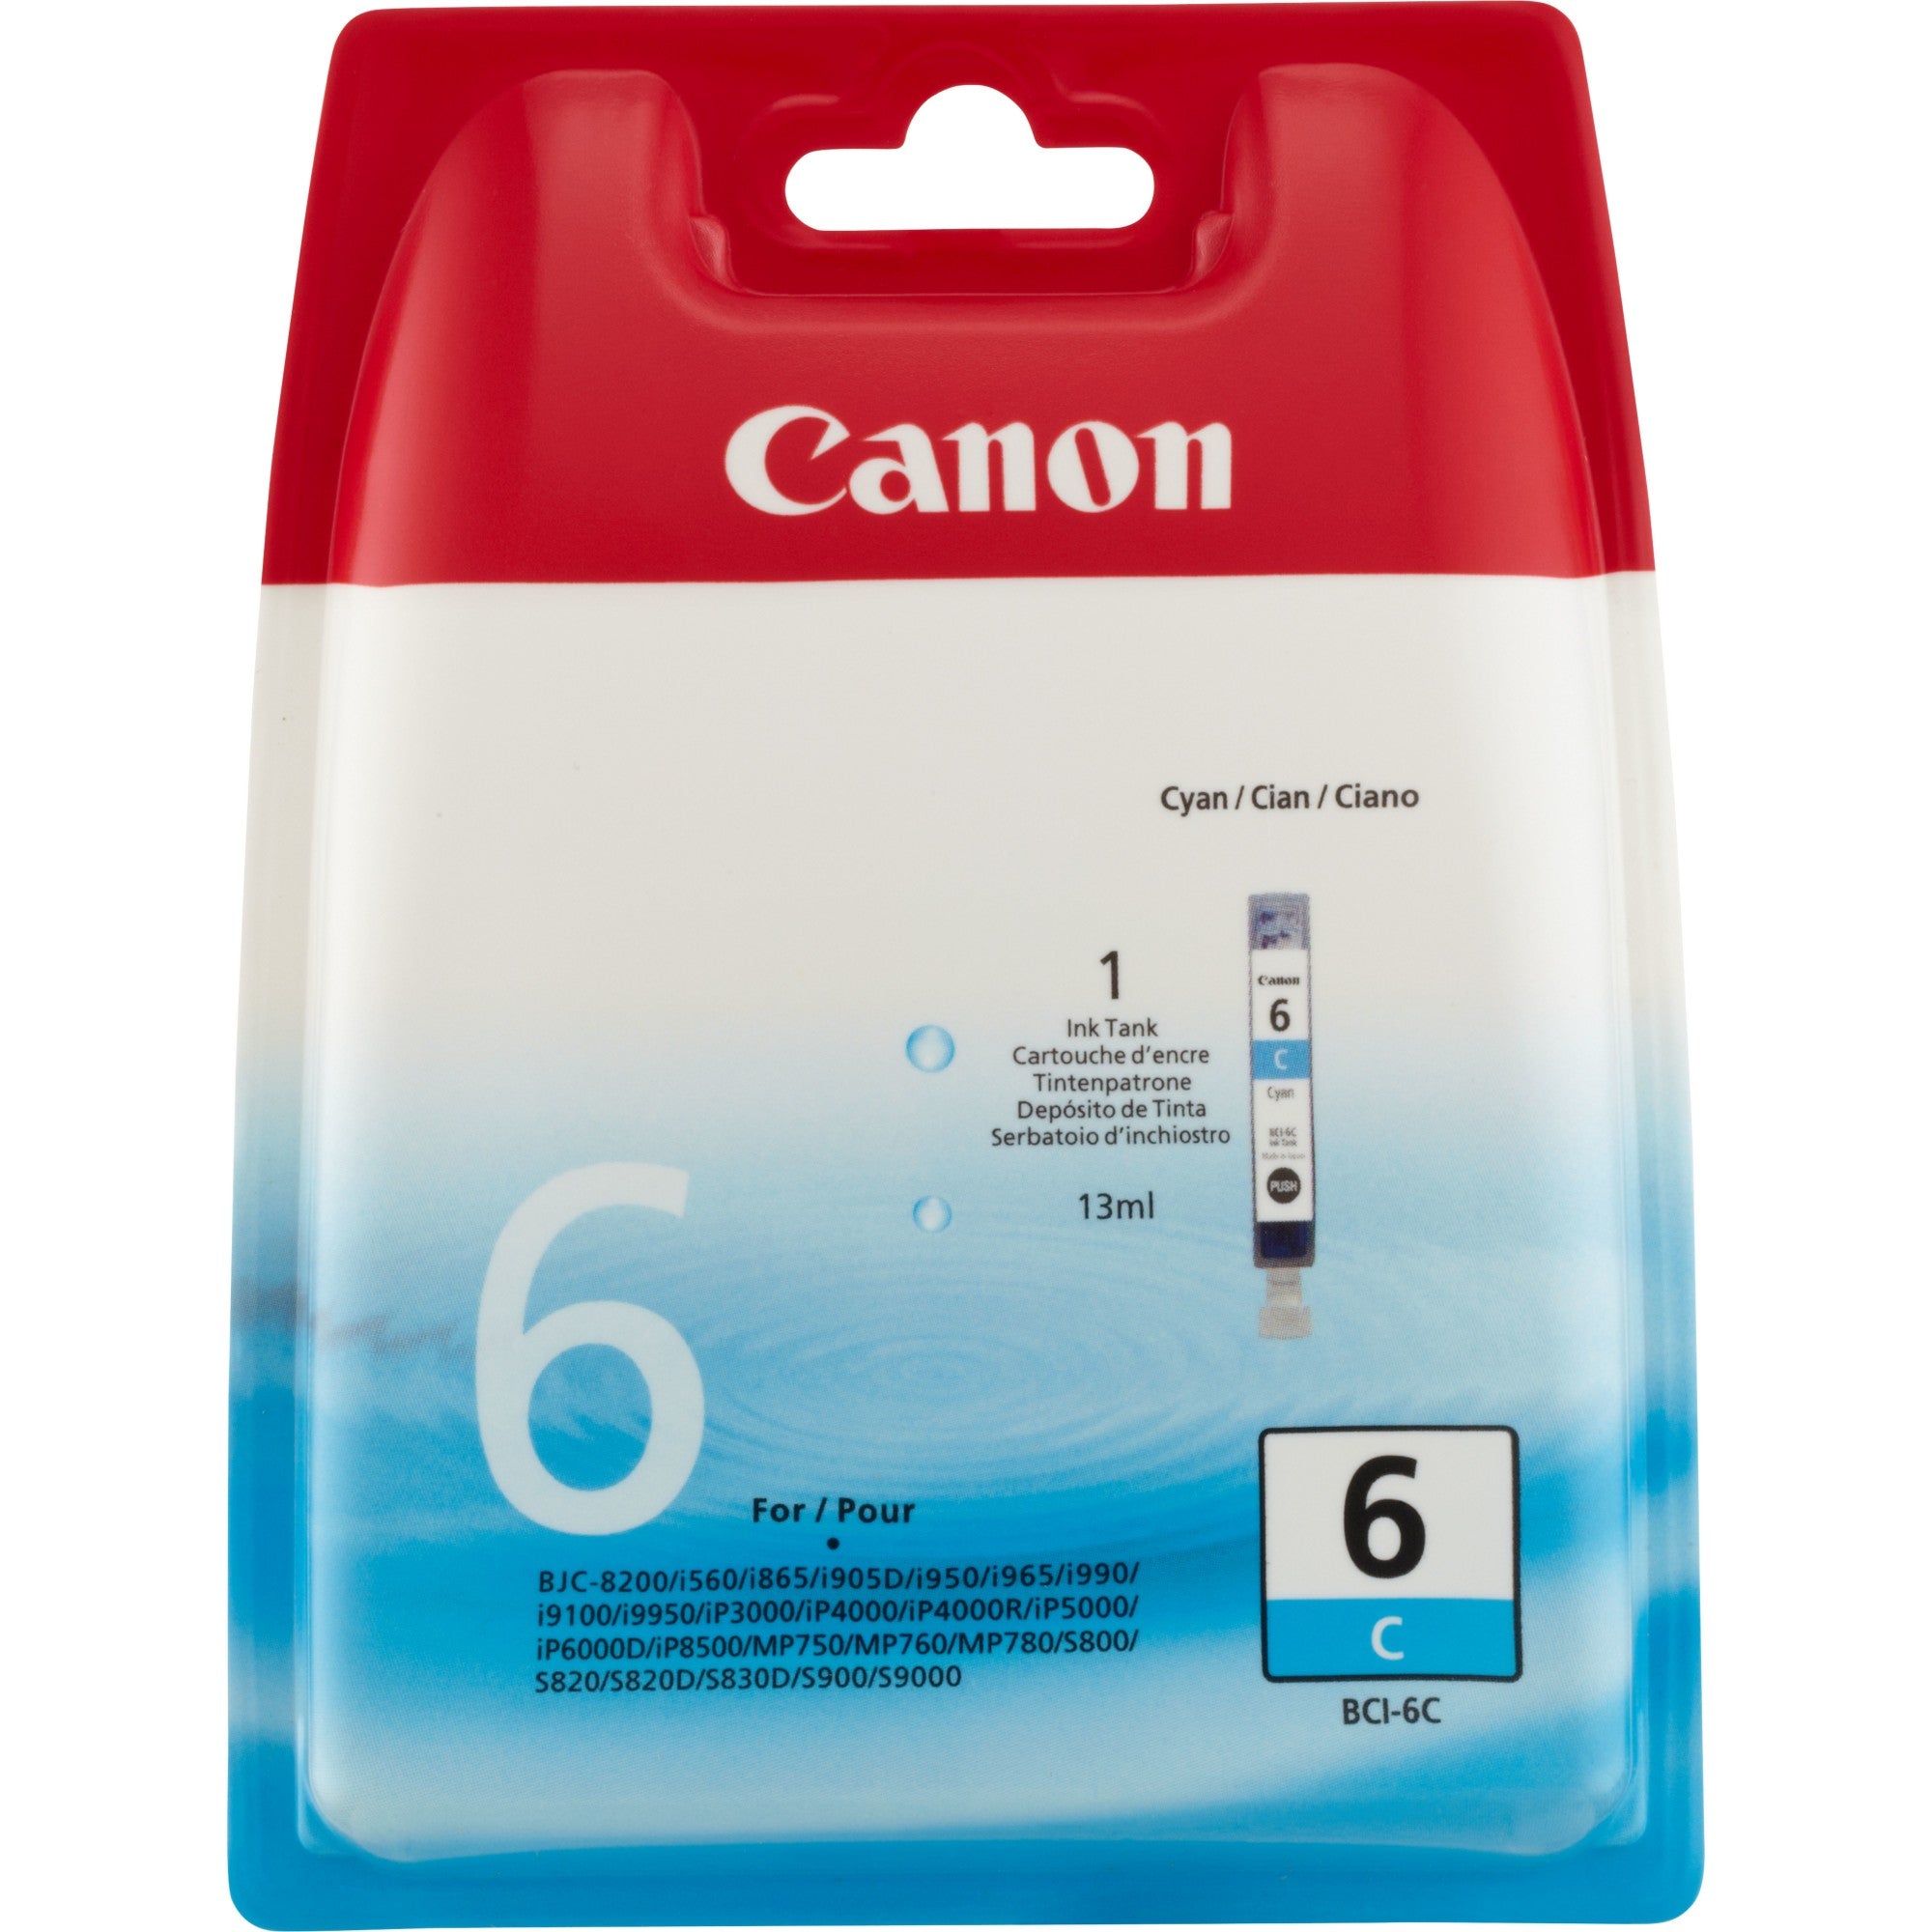 Canon 4706A002/BCI-6C Ink cartridge cyan, 280 pages ISO/IEC 24711 13ml for Canon BJC 8200/I 560/I 990/I 9900/S 800